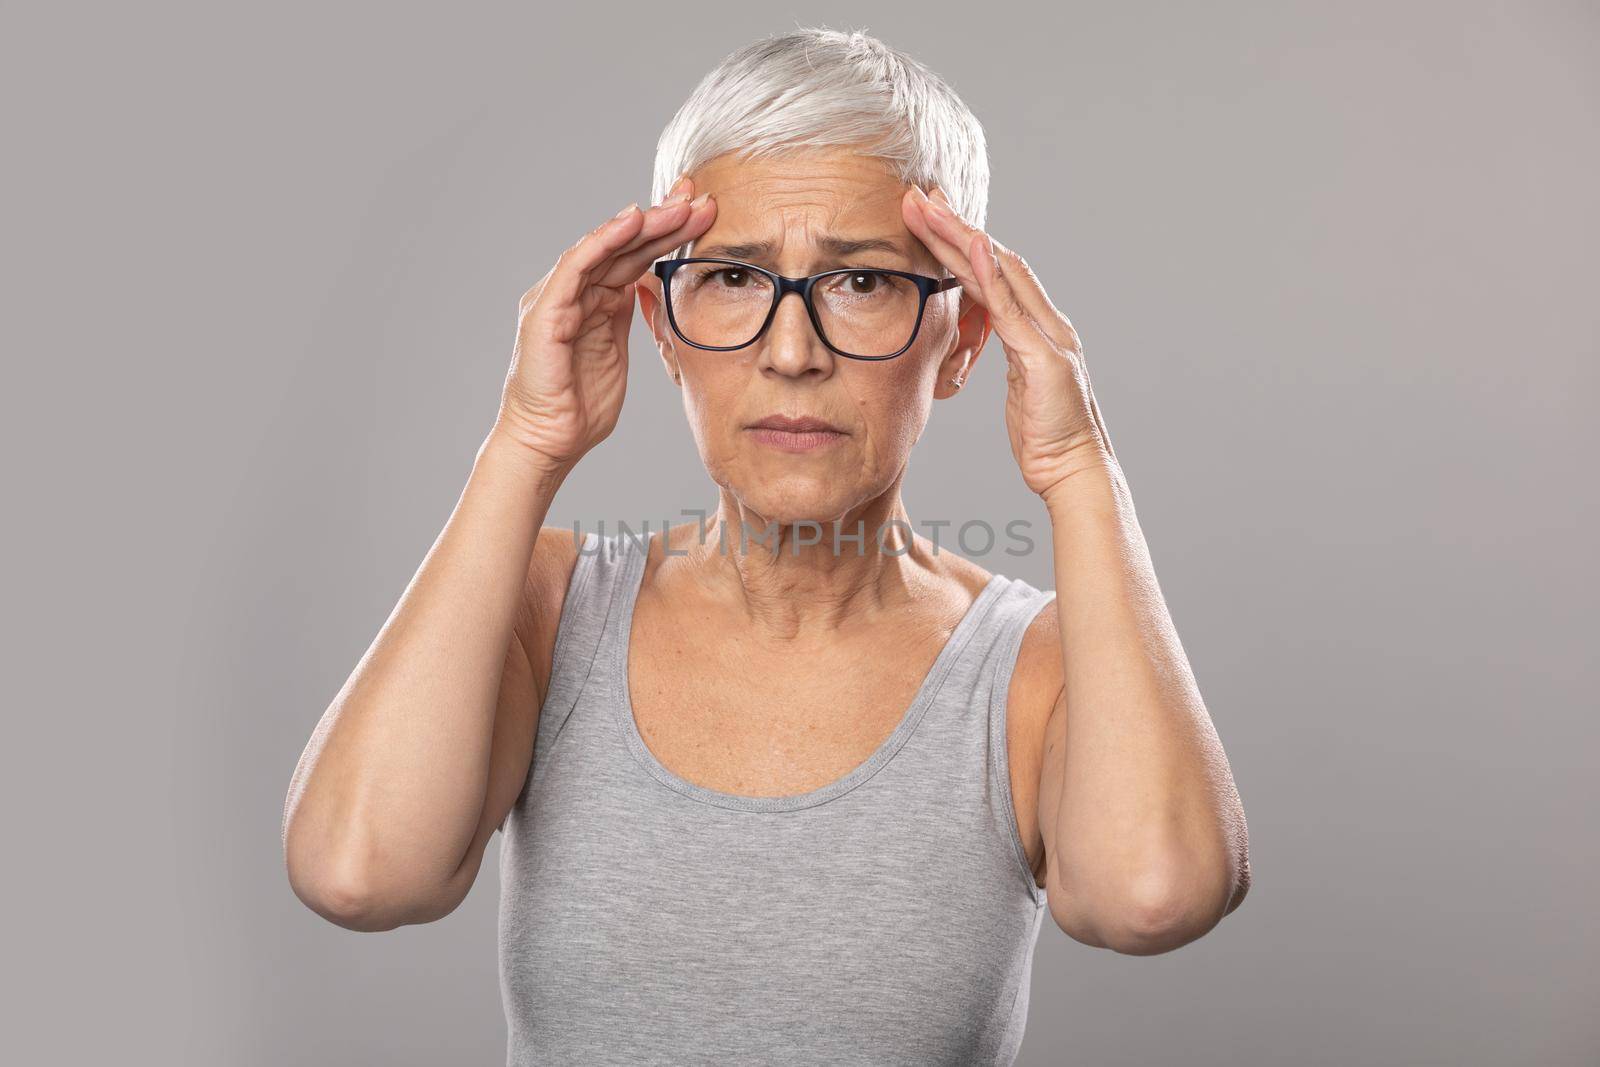 Headache. worried expression. Senior old woman with short gray hair and glasses show headache problems, healthcare and medicine concept by adamr